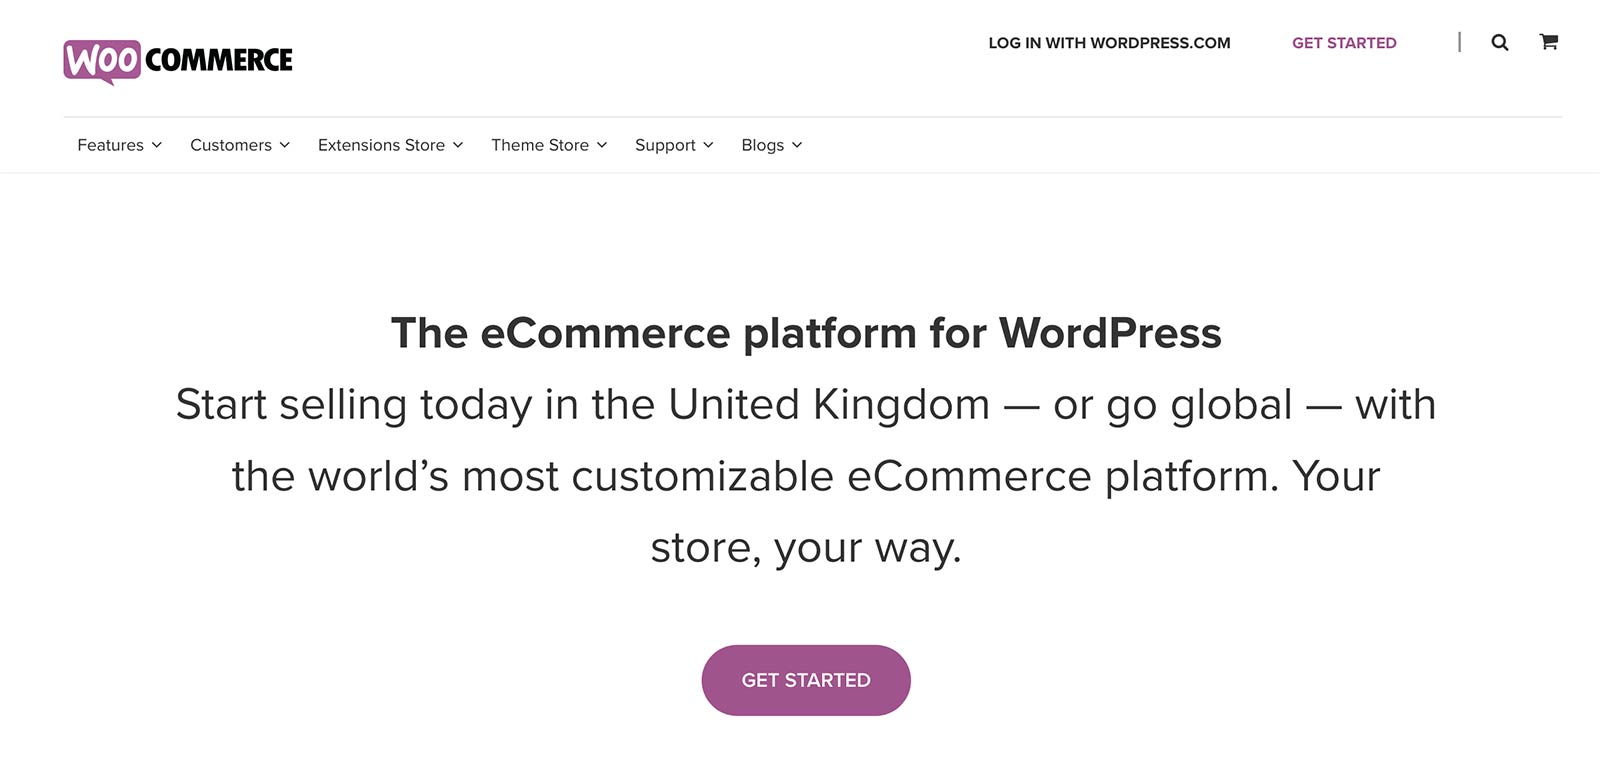 How to Make an eCommerce Store with WordPress and WooCommerce